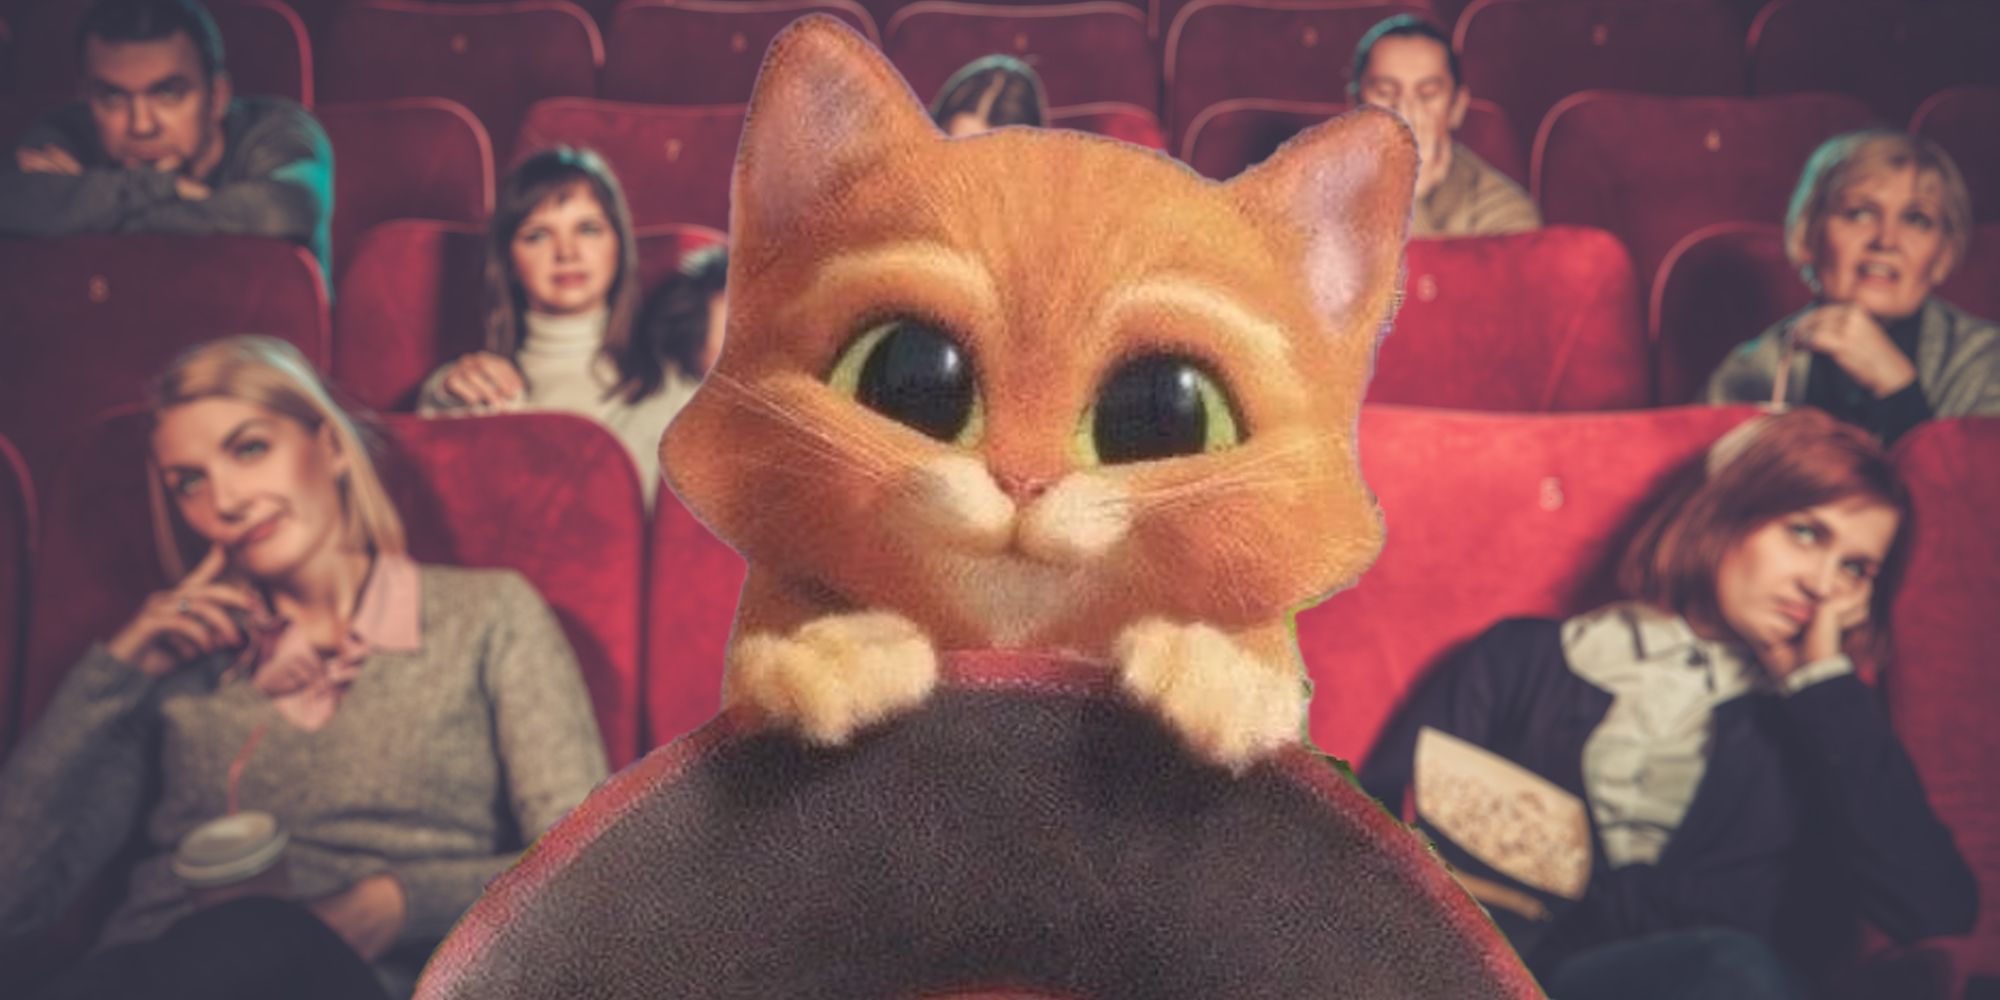 Puss in Boots at the cinema